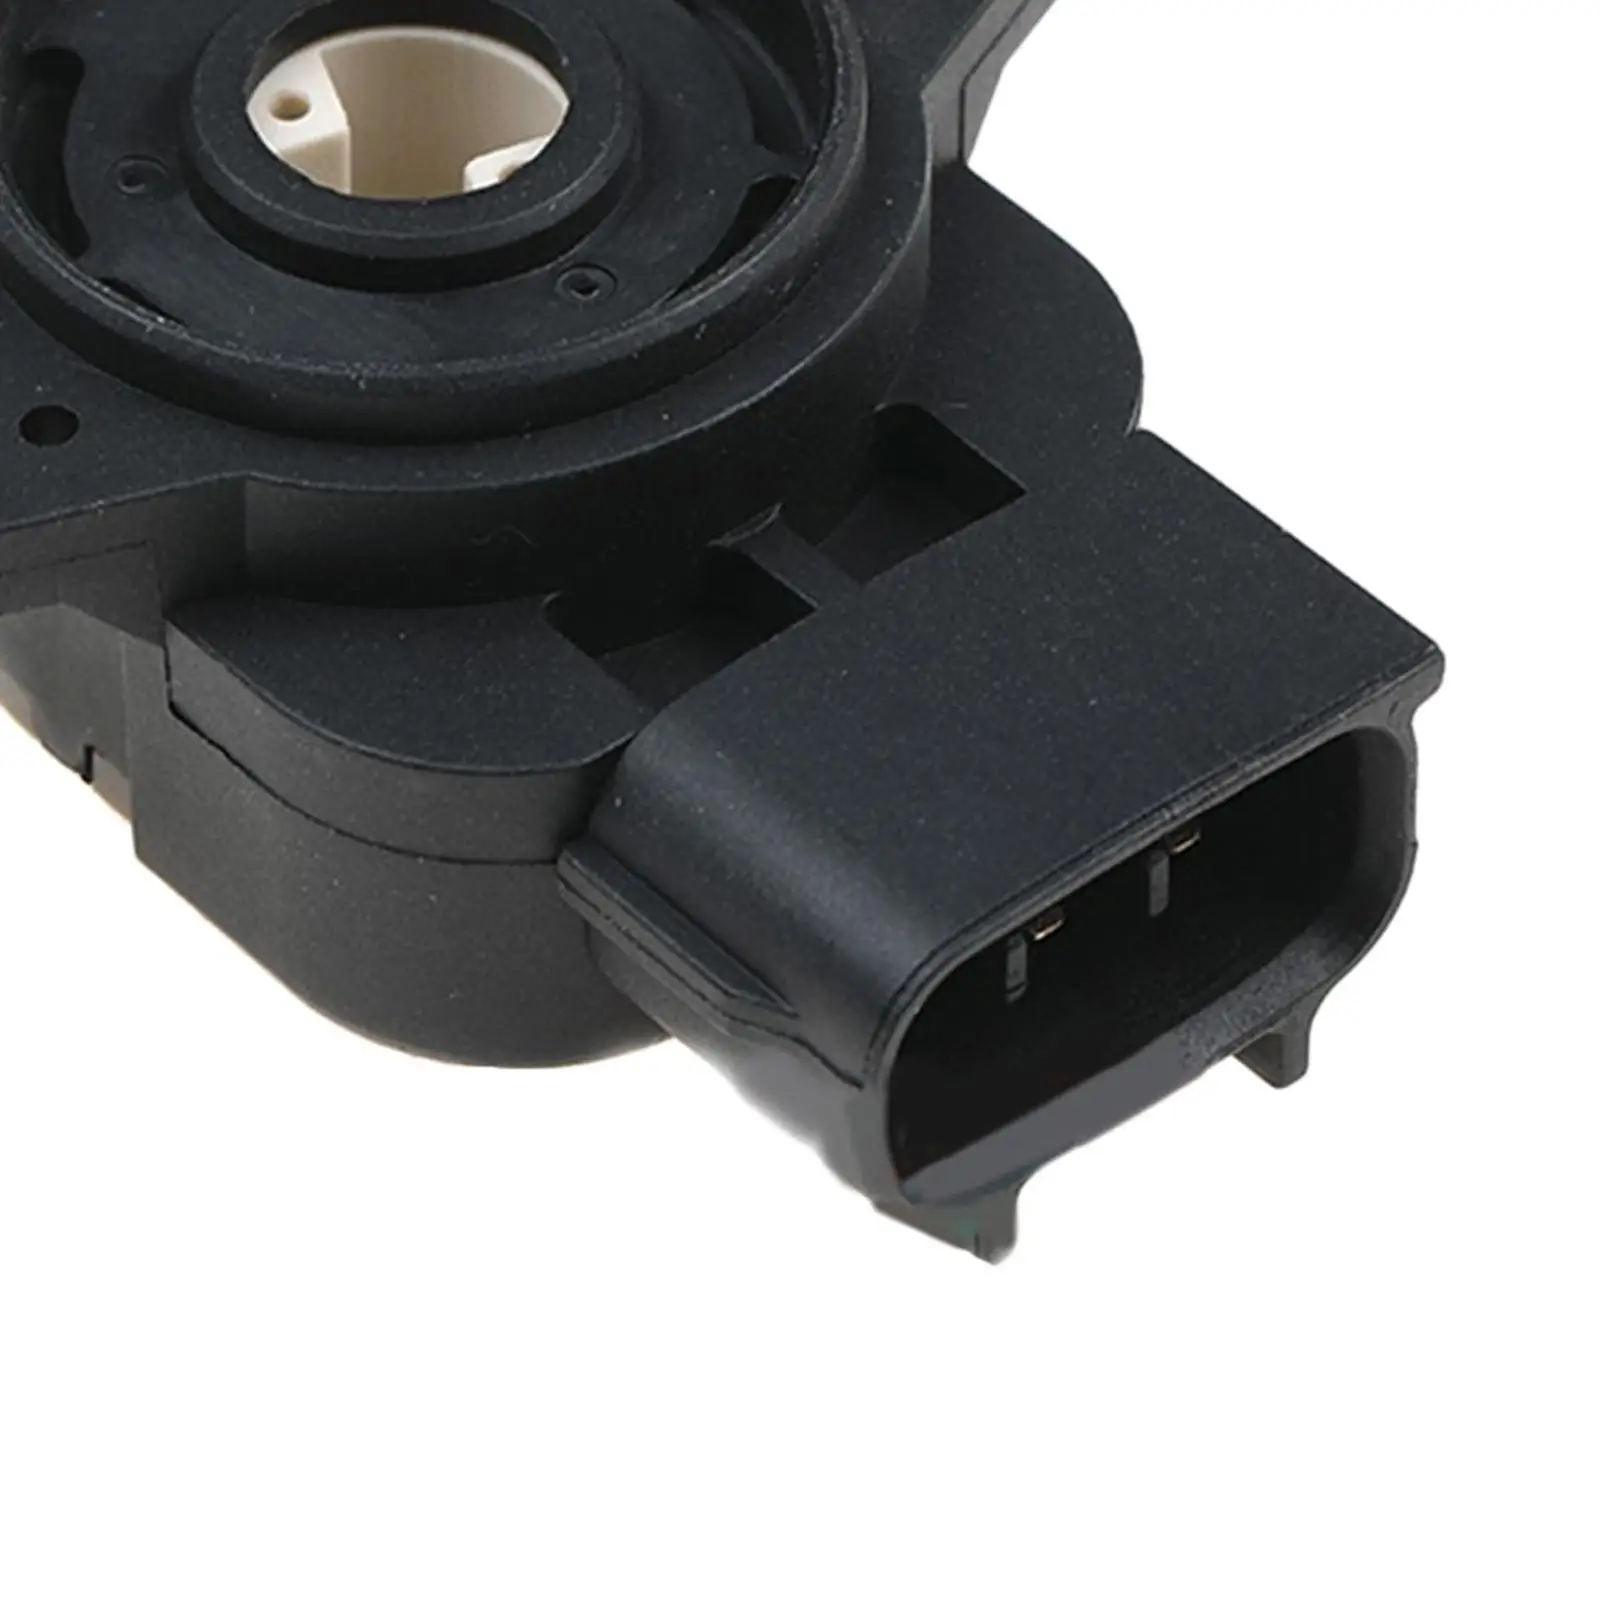 89452-20130 1985001071 8945220130 Throttle Position Sensor 198500-1071 for Replacement Kit Replacements Parts